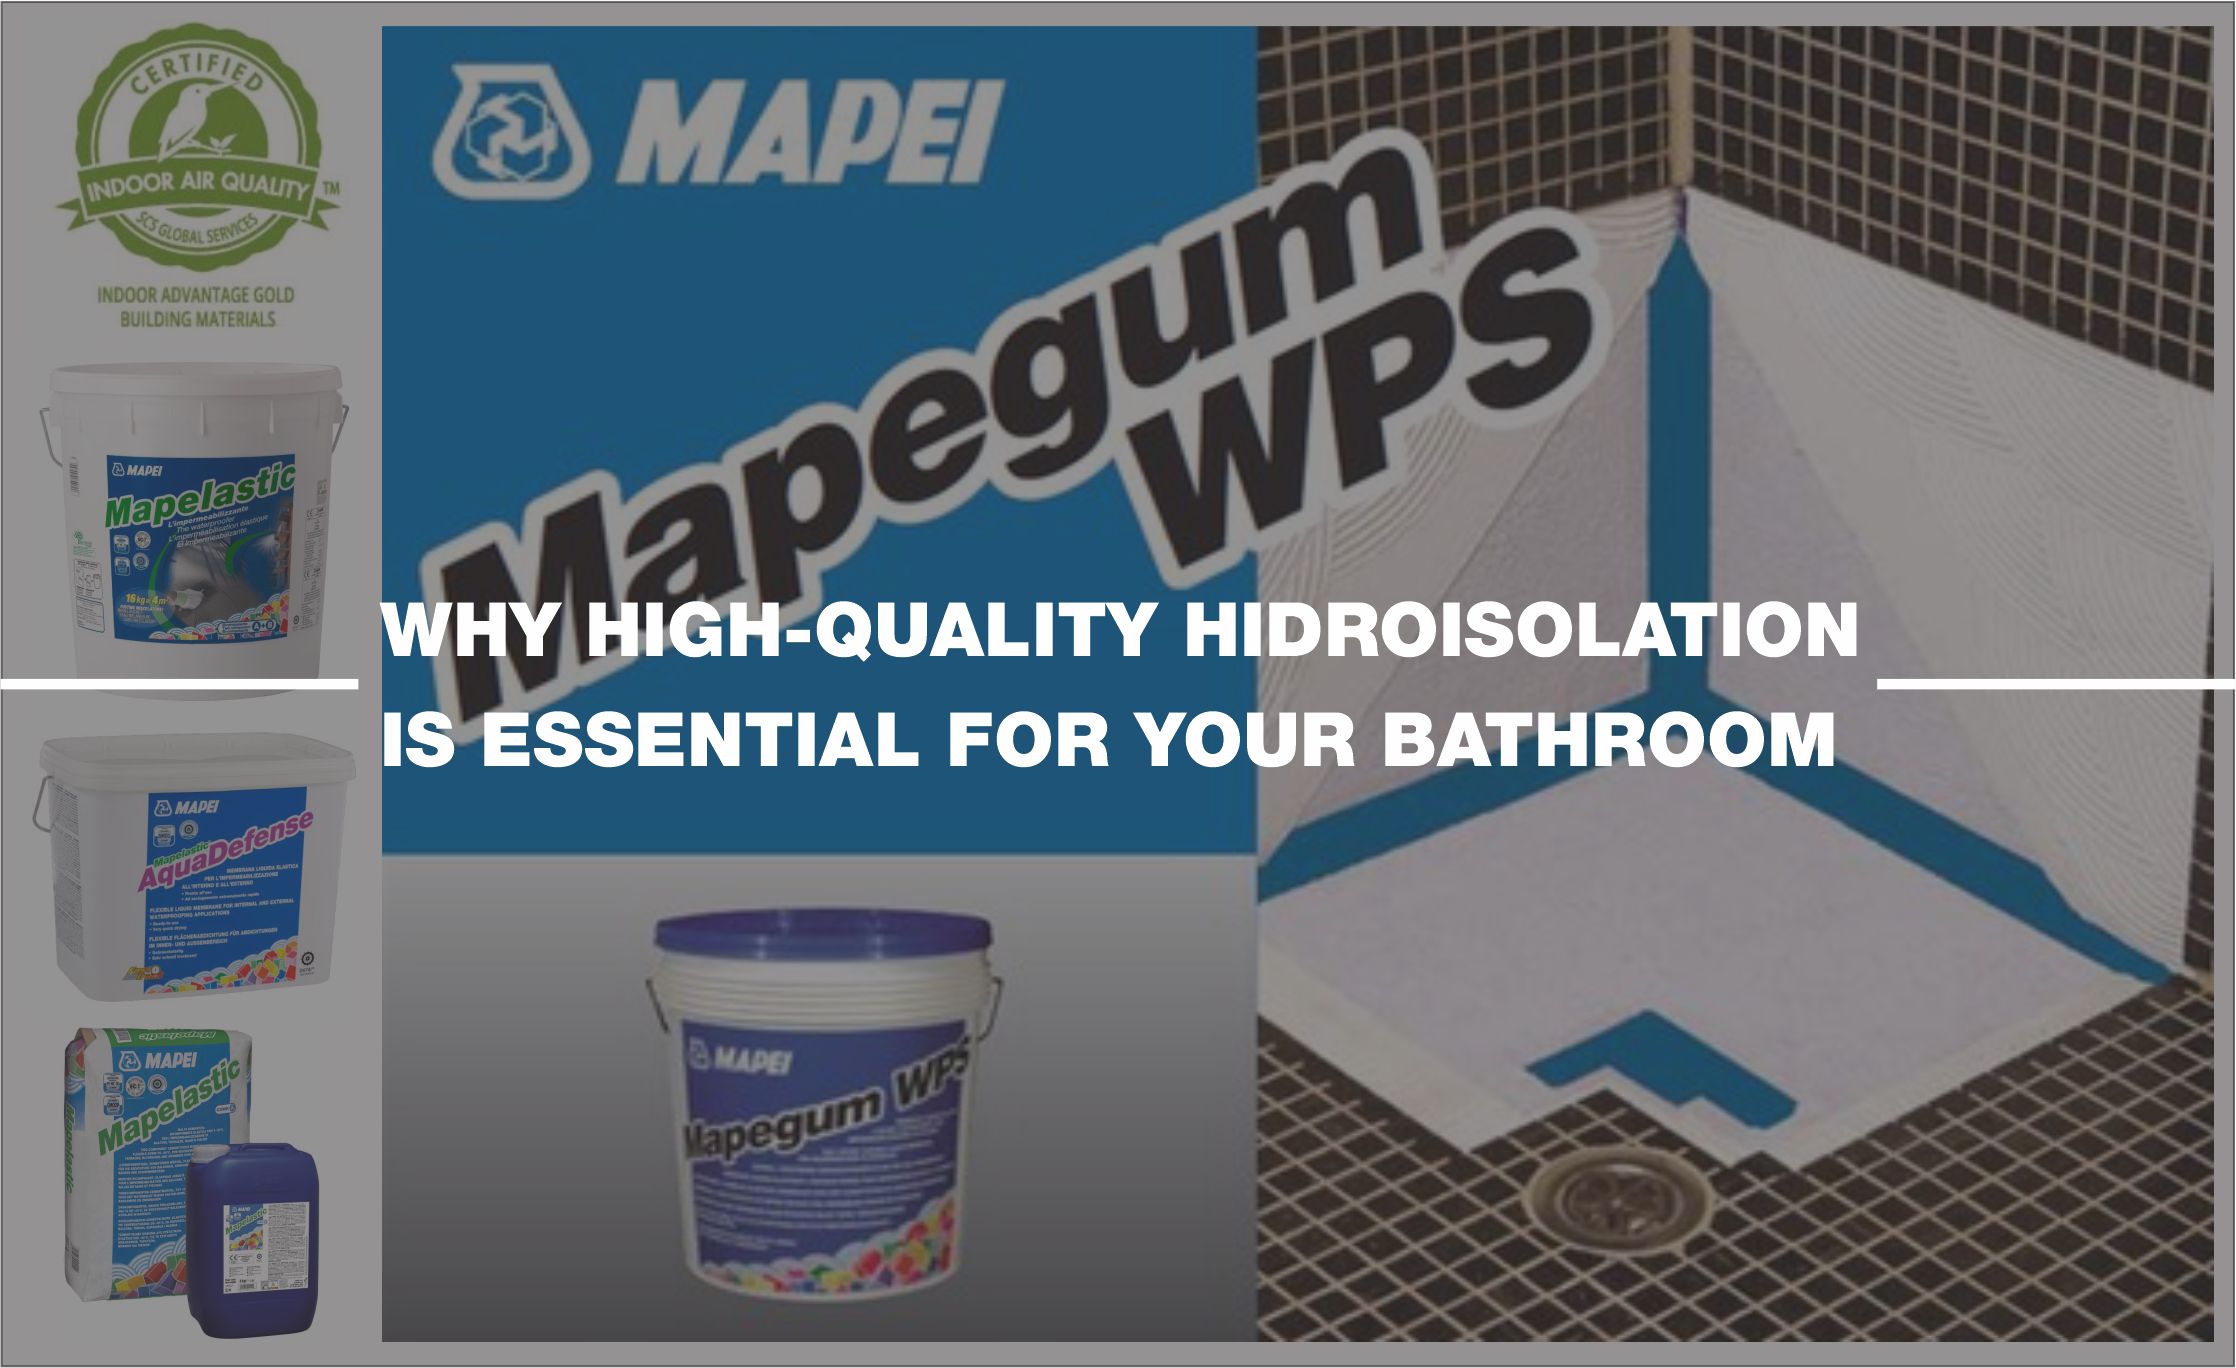 Why High-Quality Hydroisolation is Essential for Your Bathroom